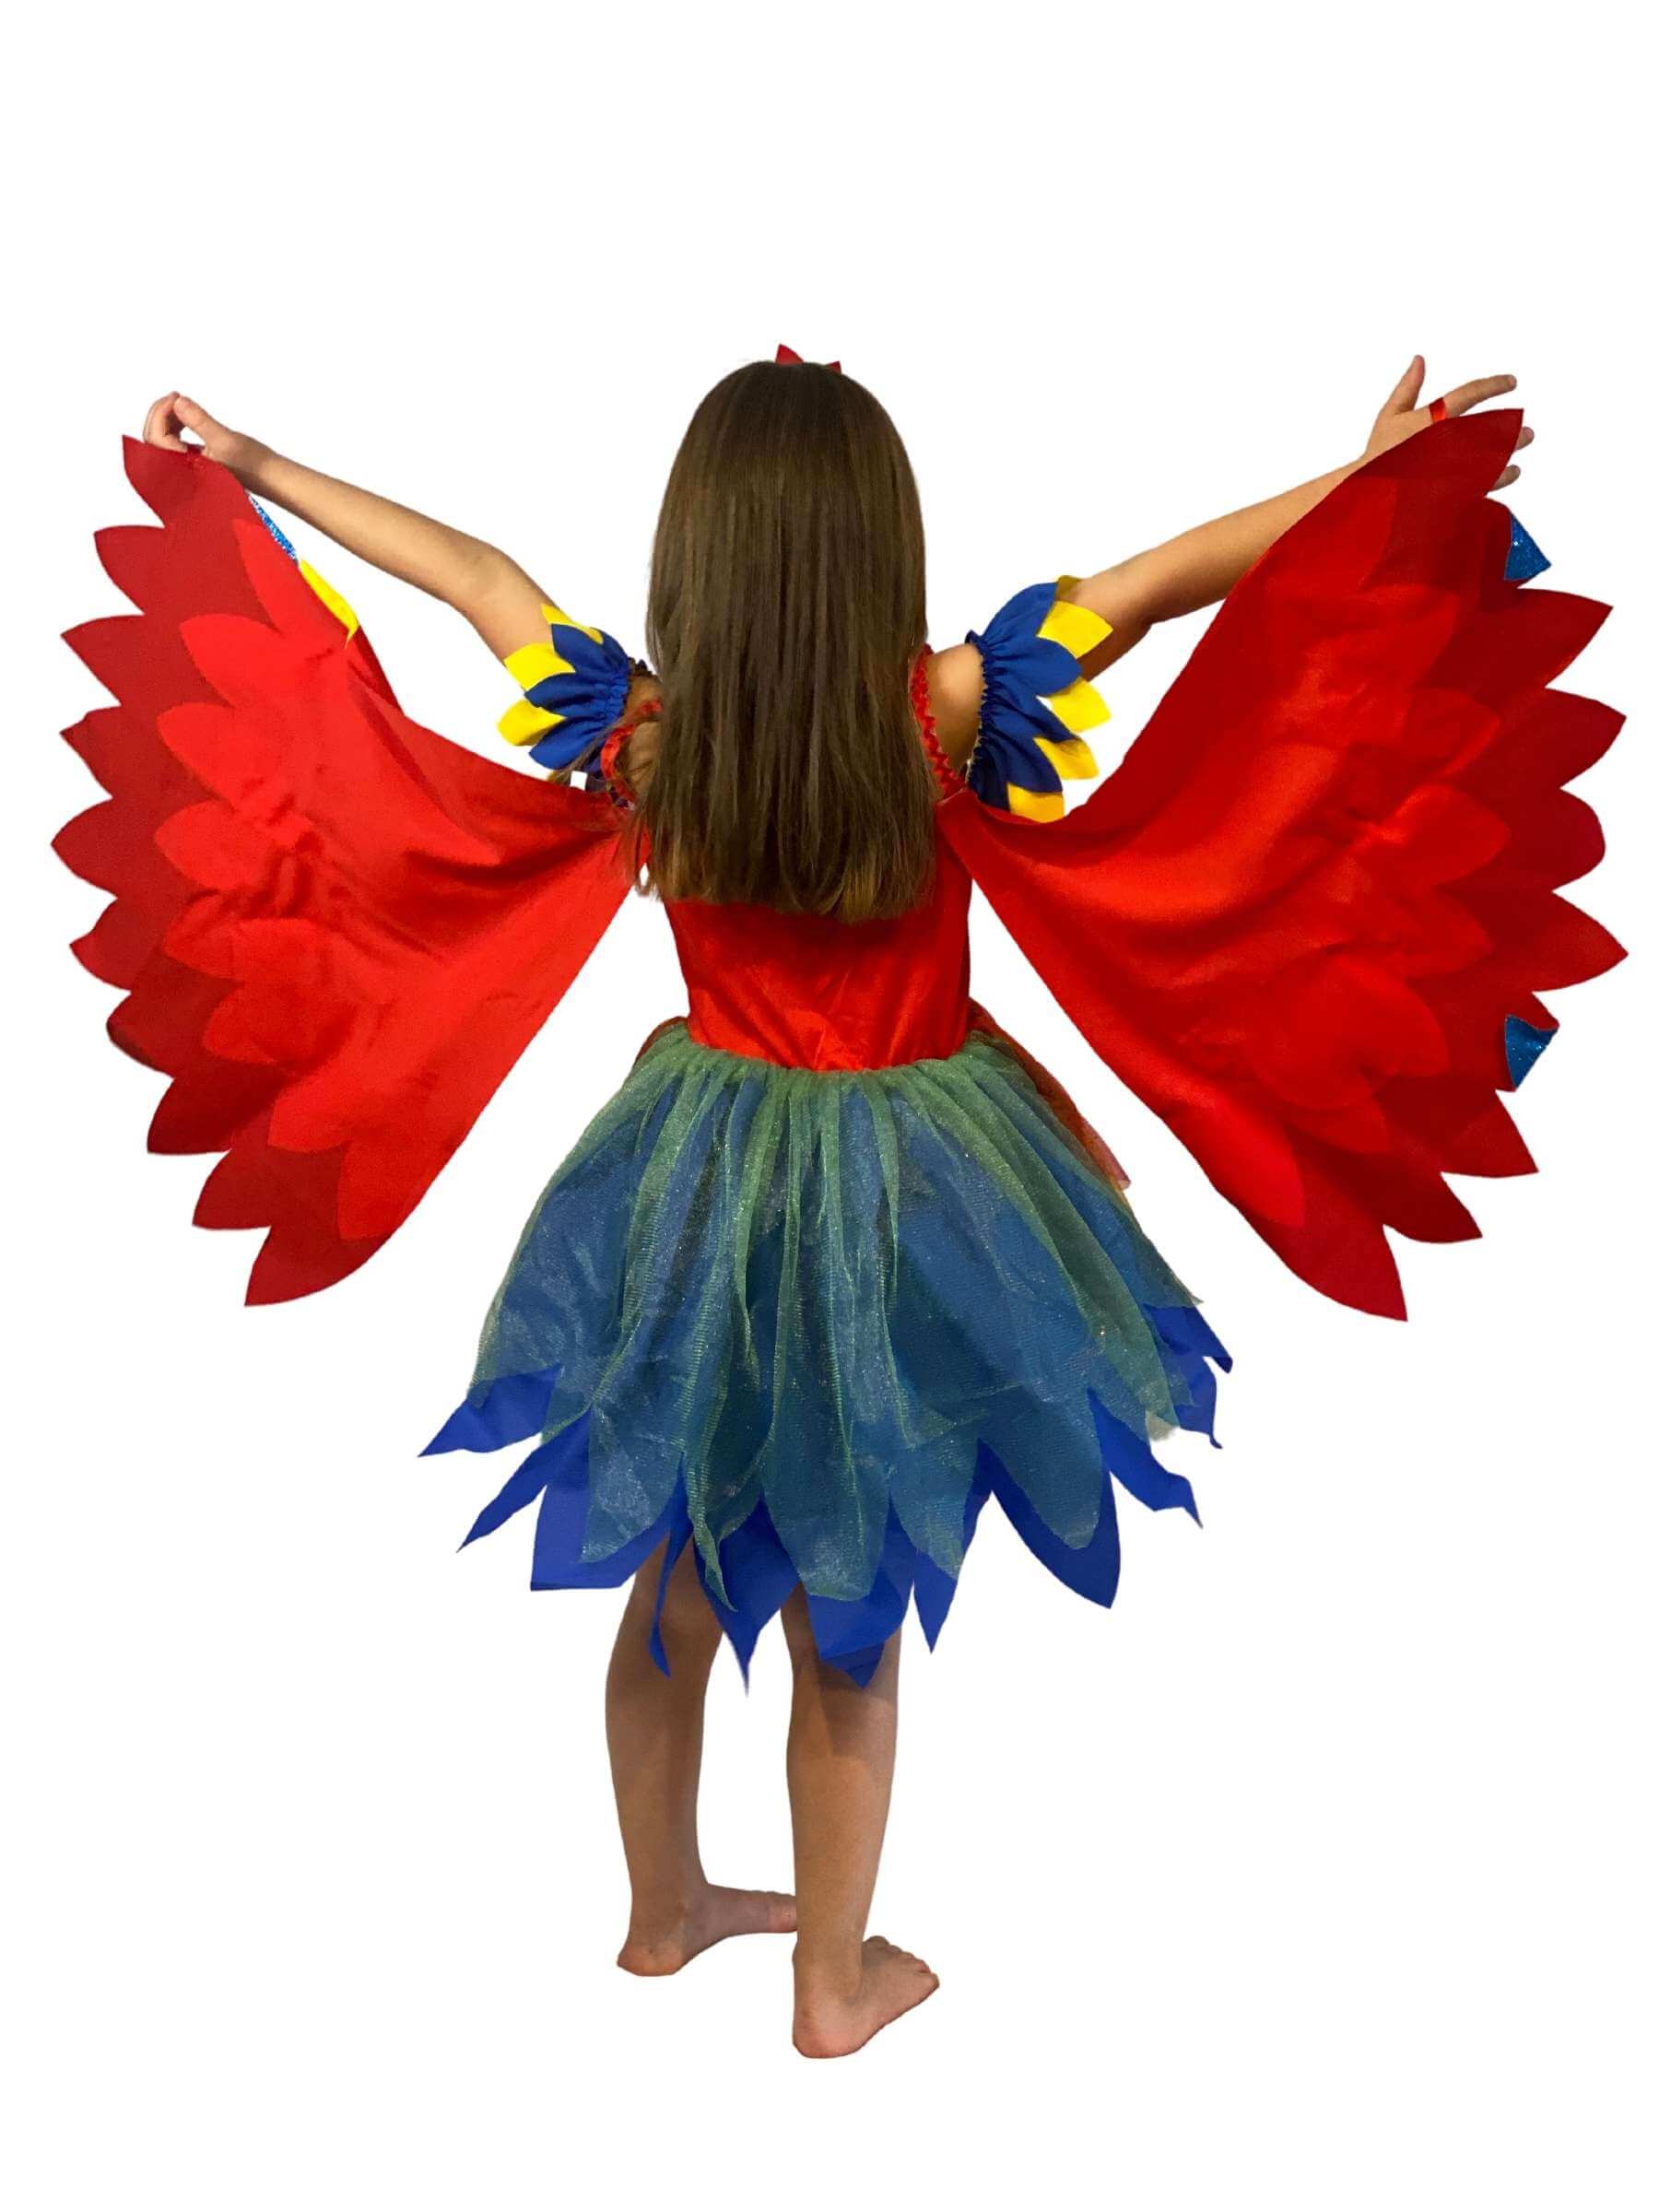 Girl wearing Macaw parrot costume from behind showing the back of the wings which are red from the back.